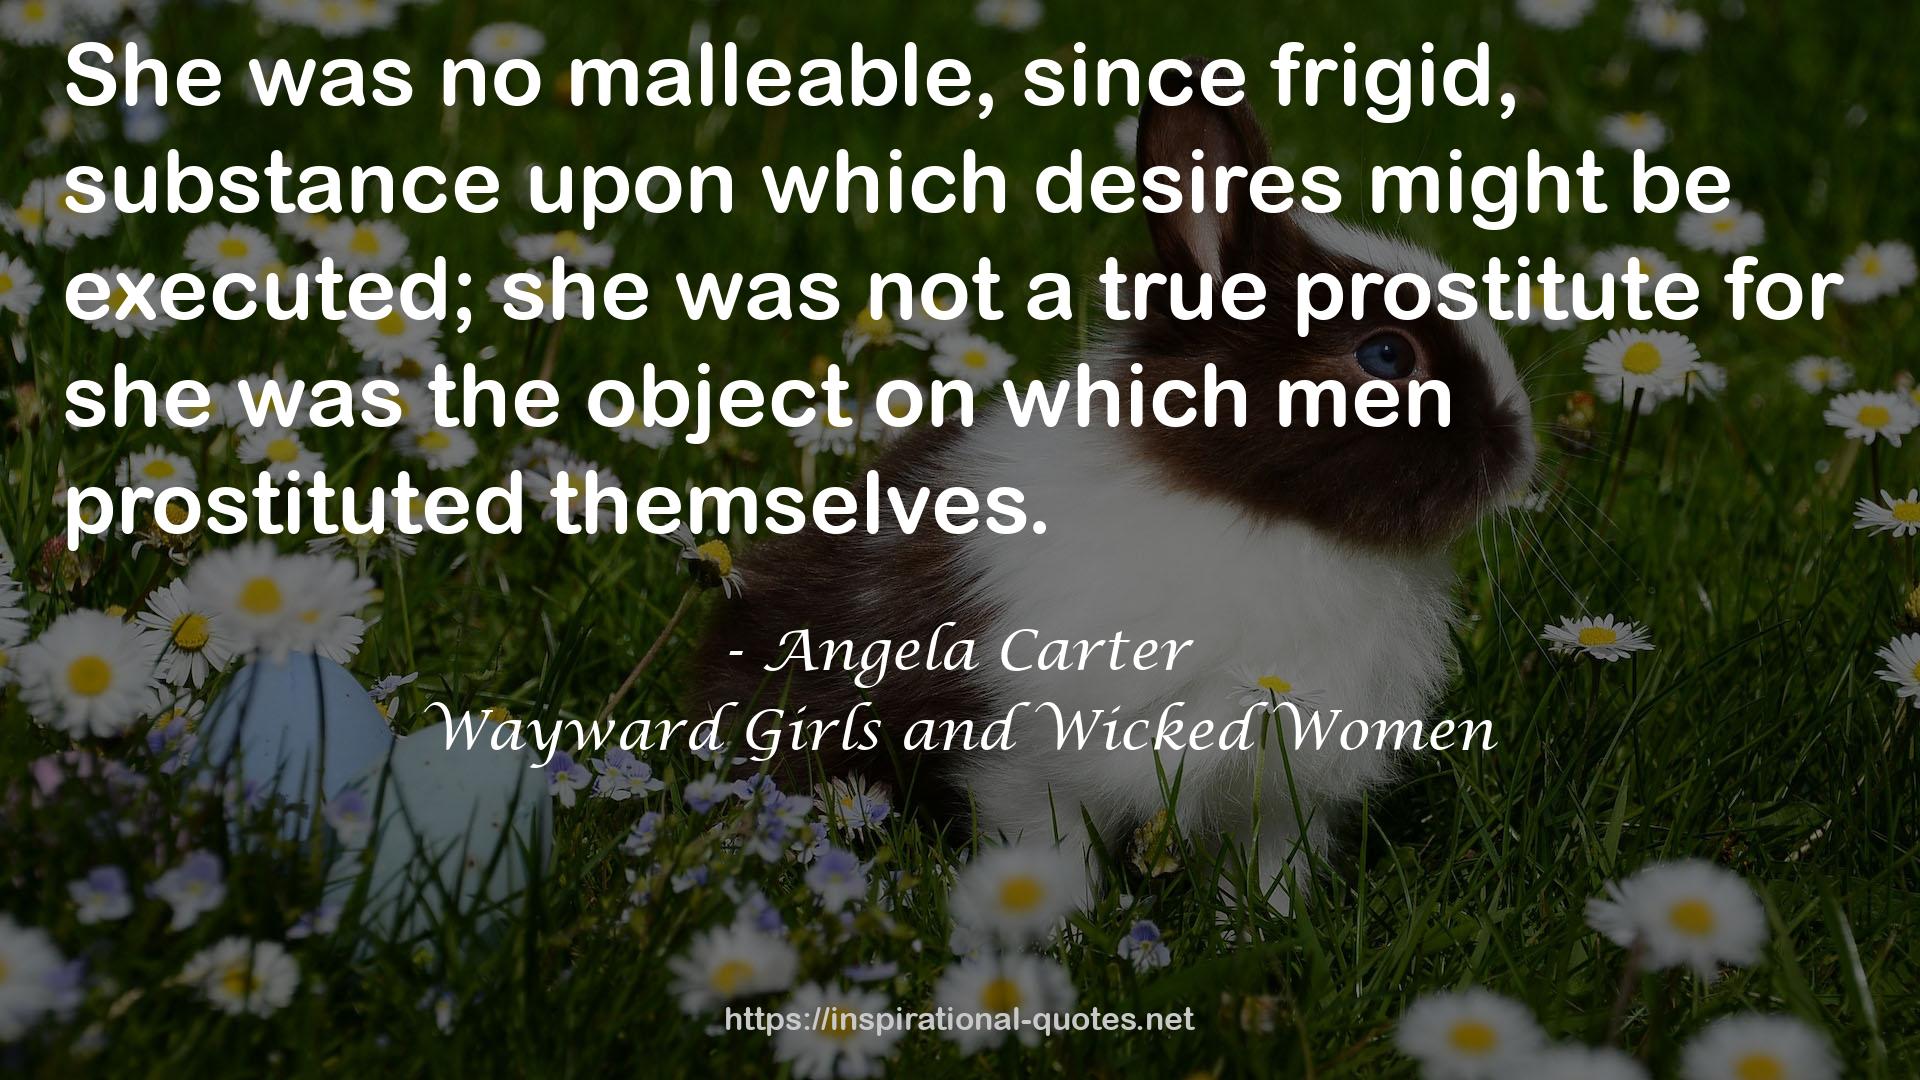 Wayward Girls and Wicked Women QUOTES